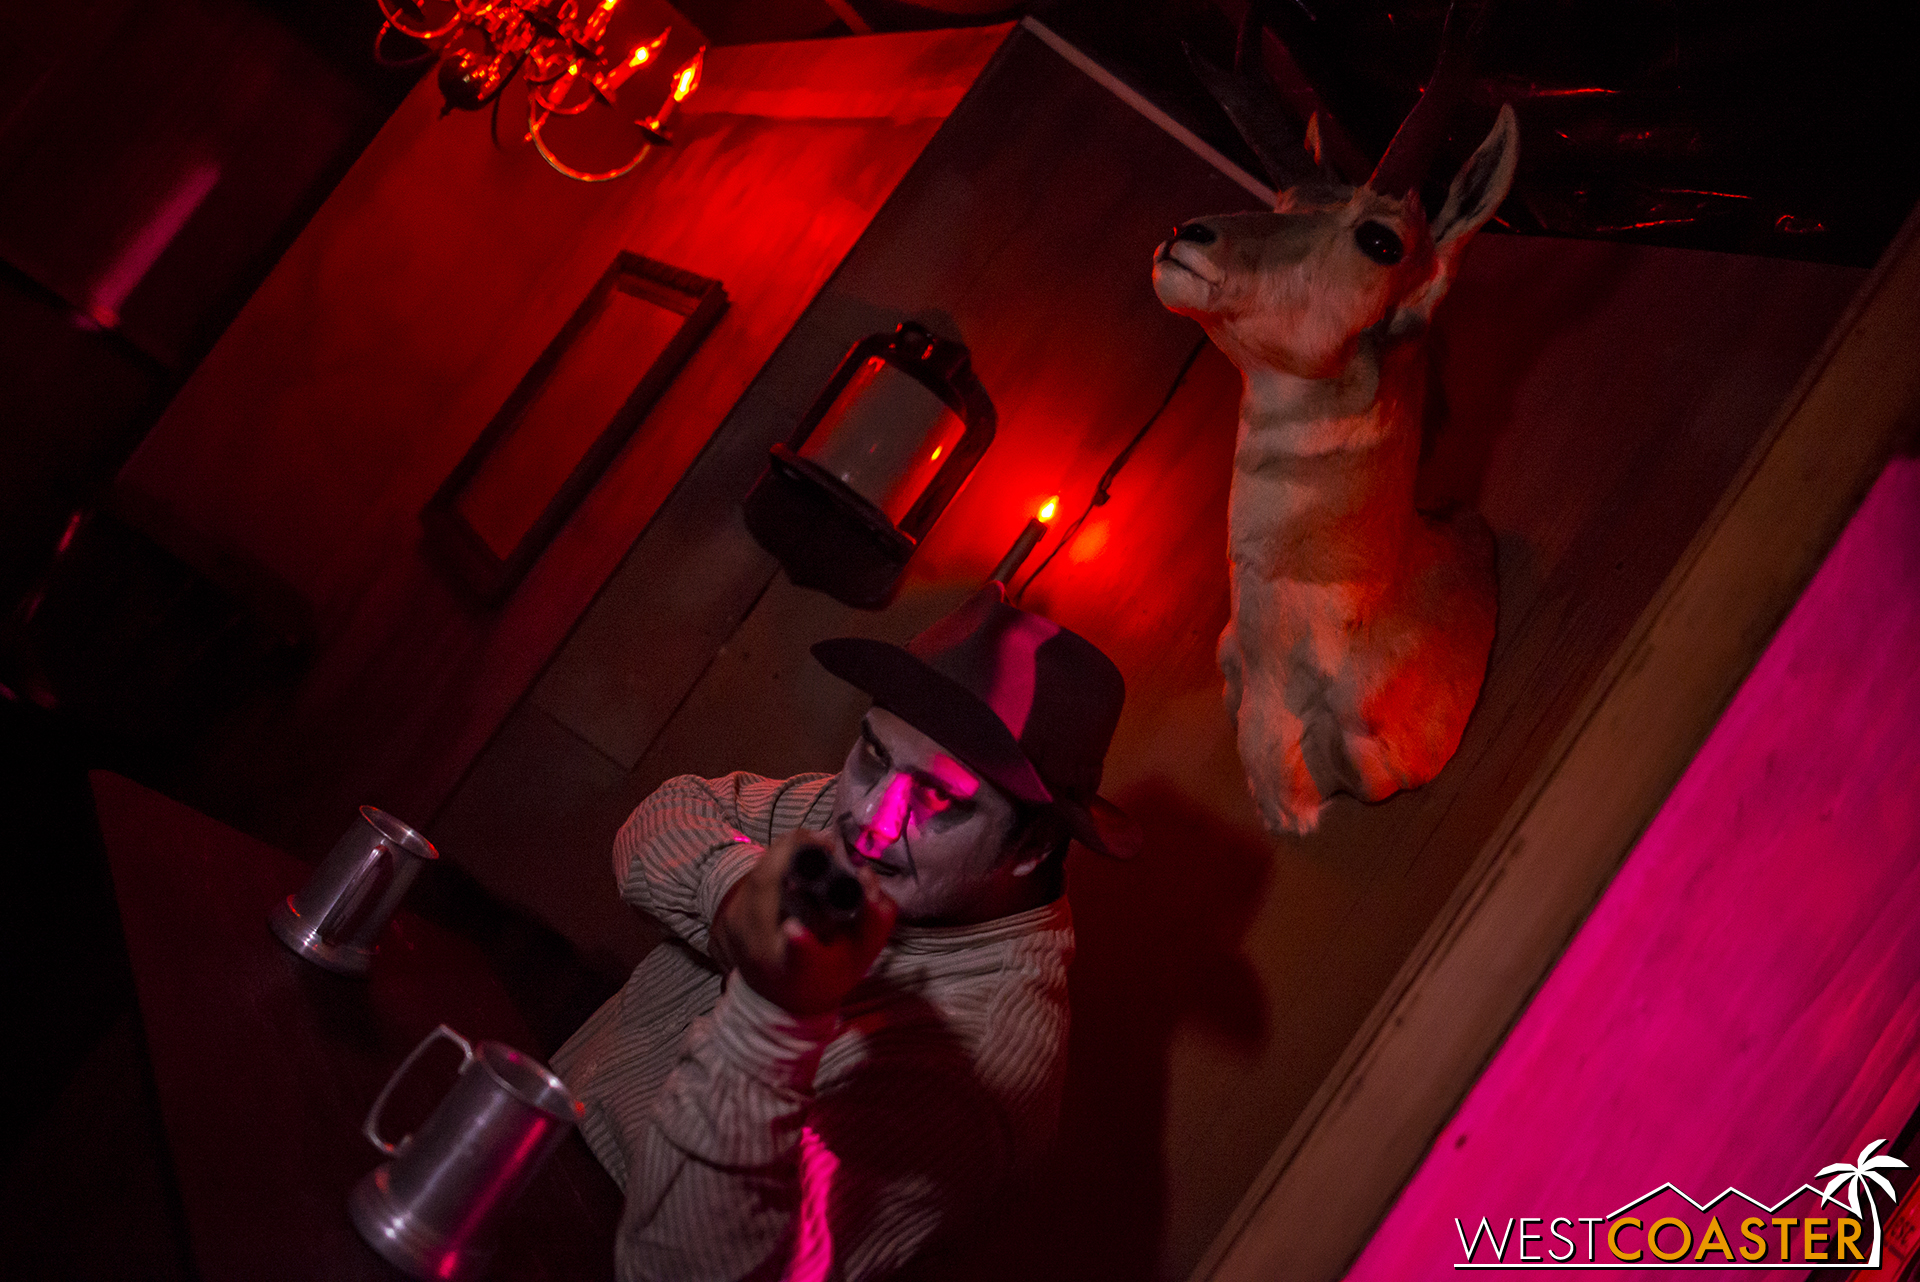  In the Saloon, the bartender stands guard. 